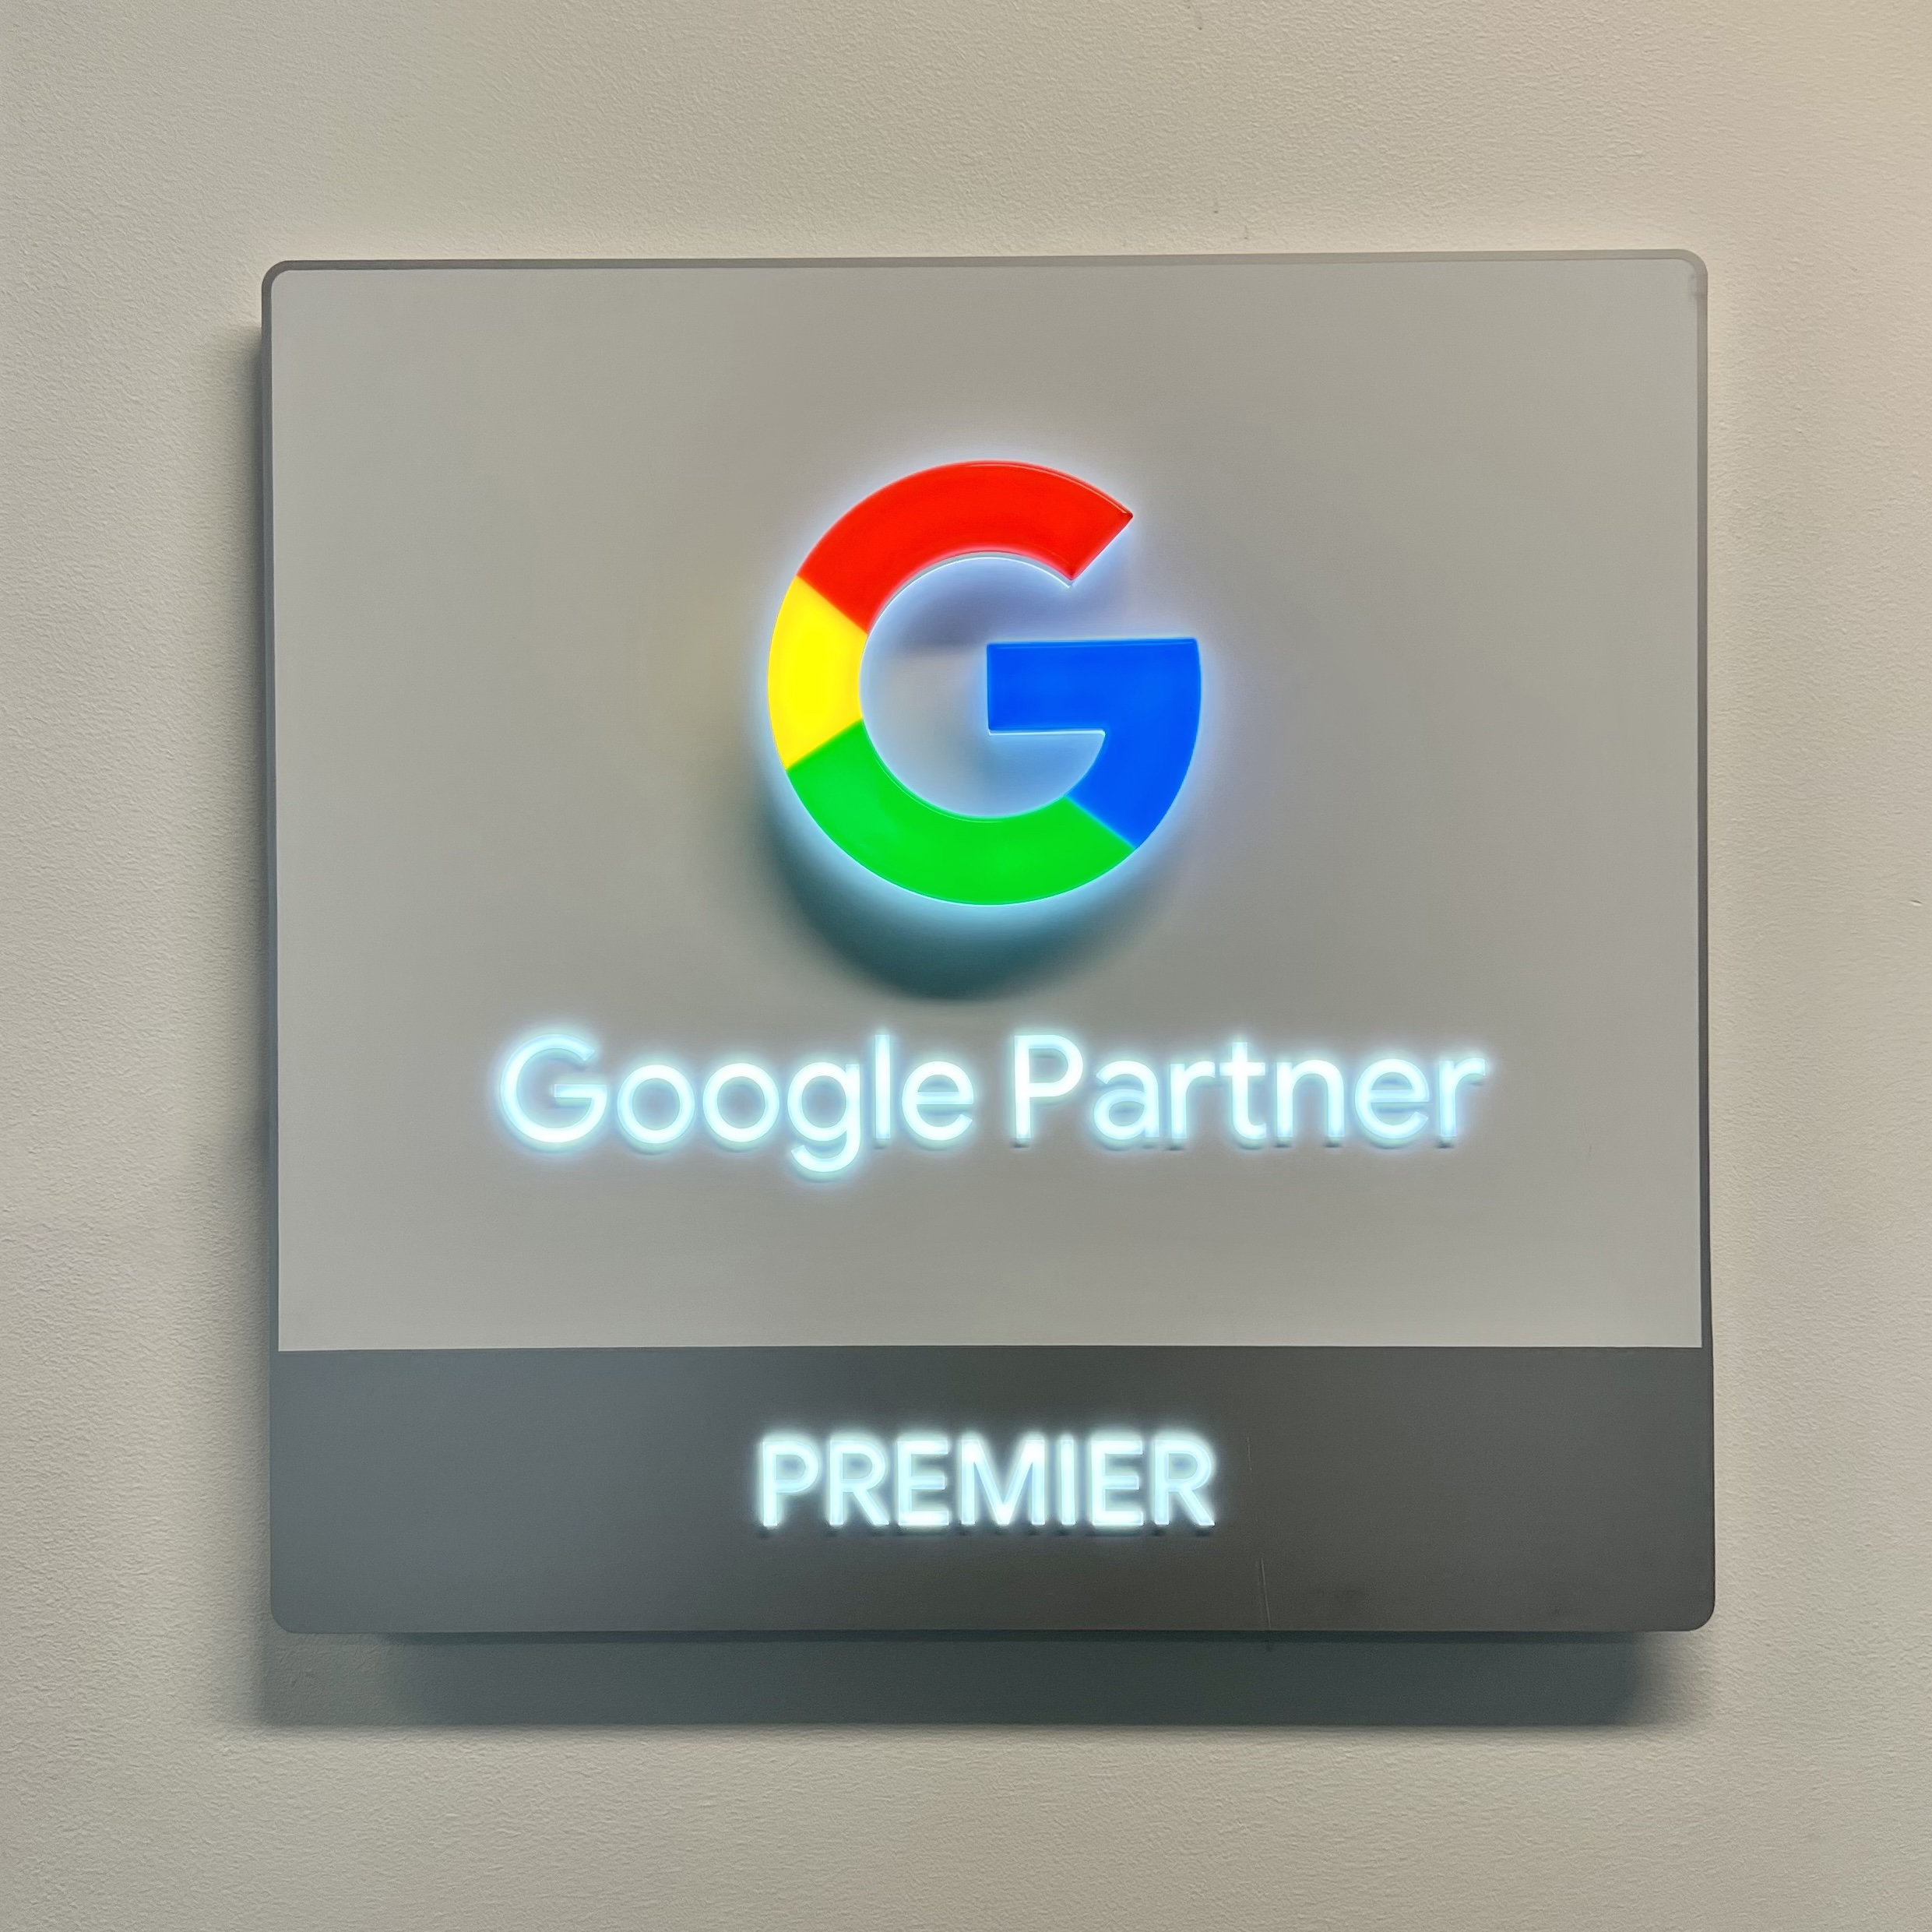 Google Premier Partner badge mounted on the wall.